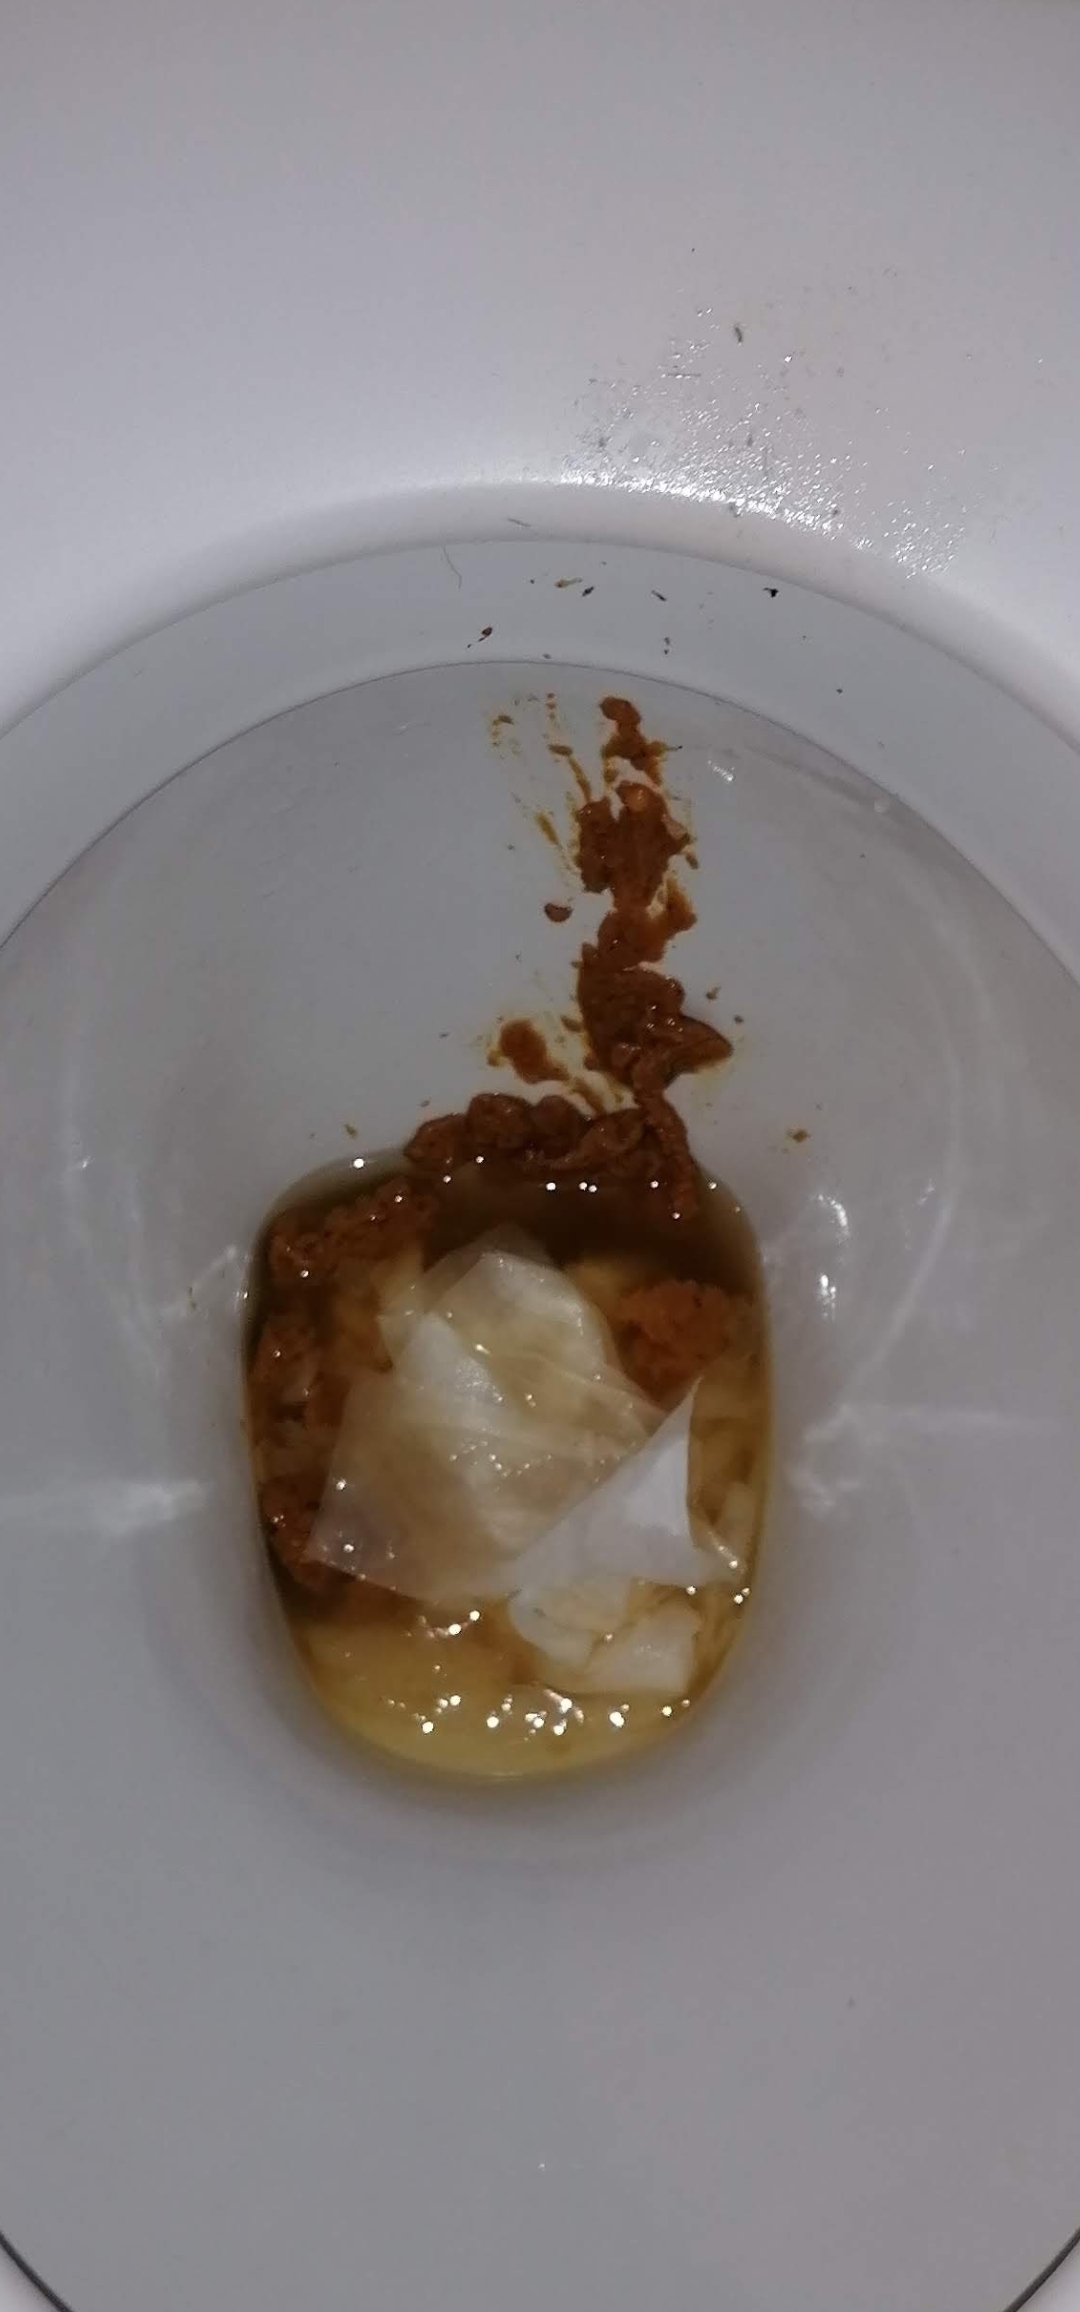 Badly needed shit at my mates place this morning